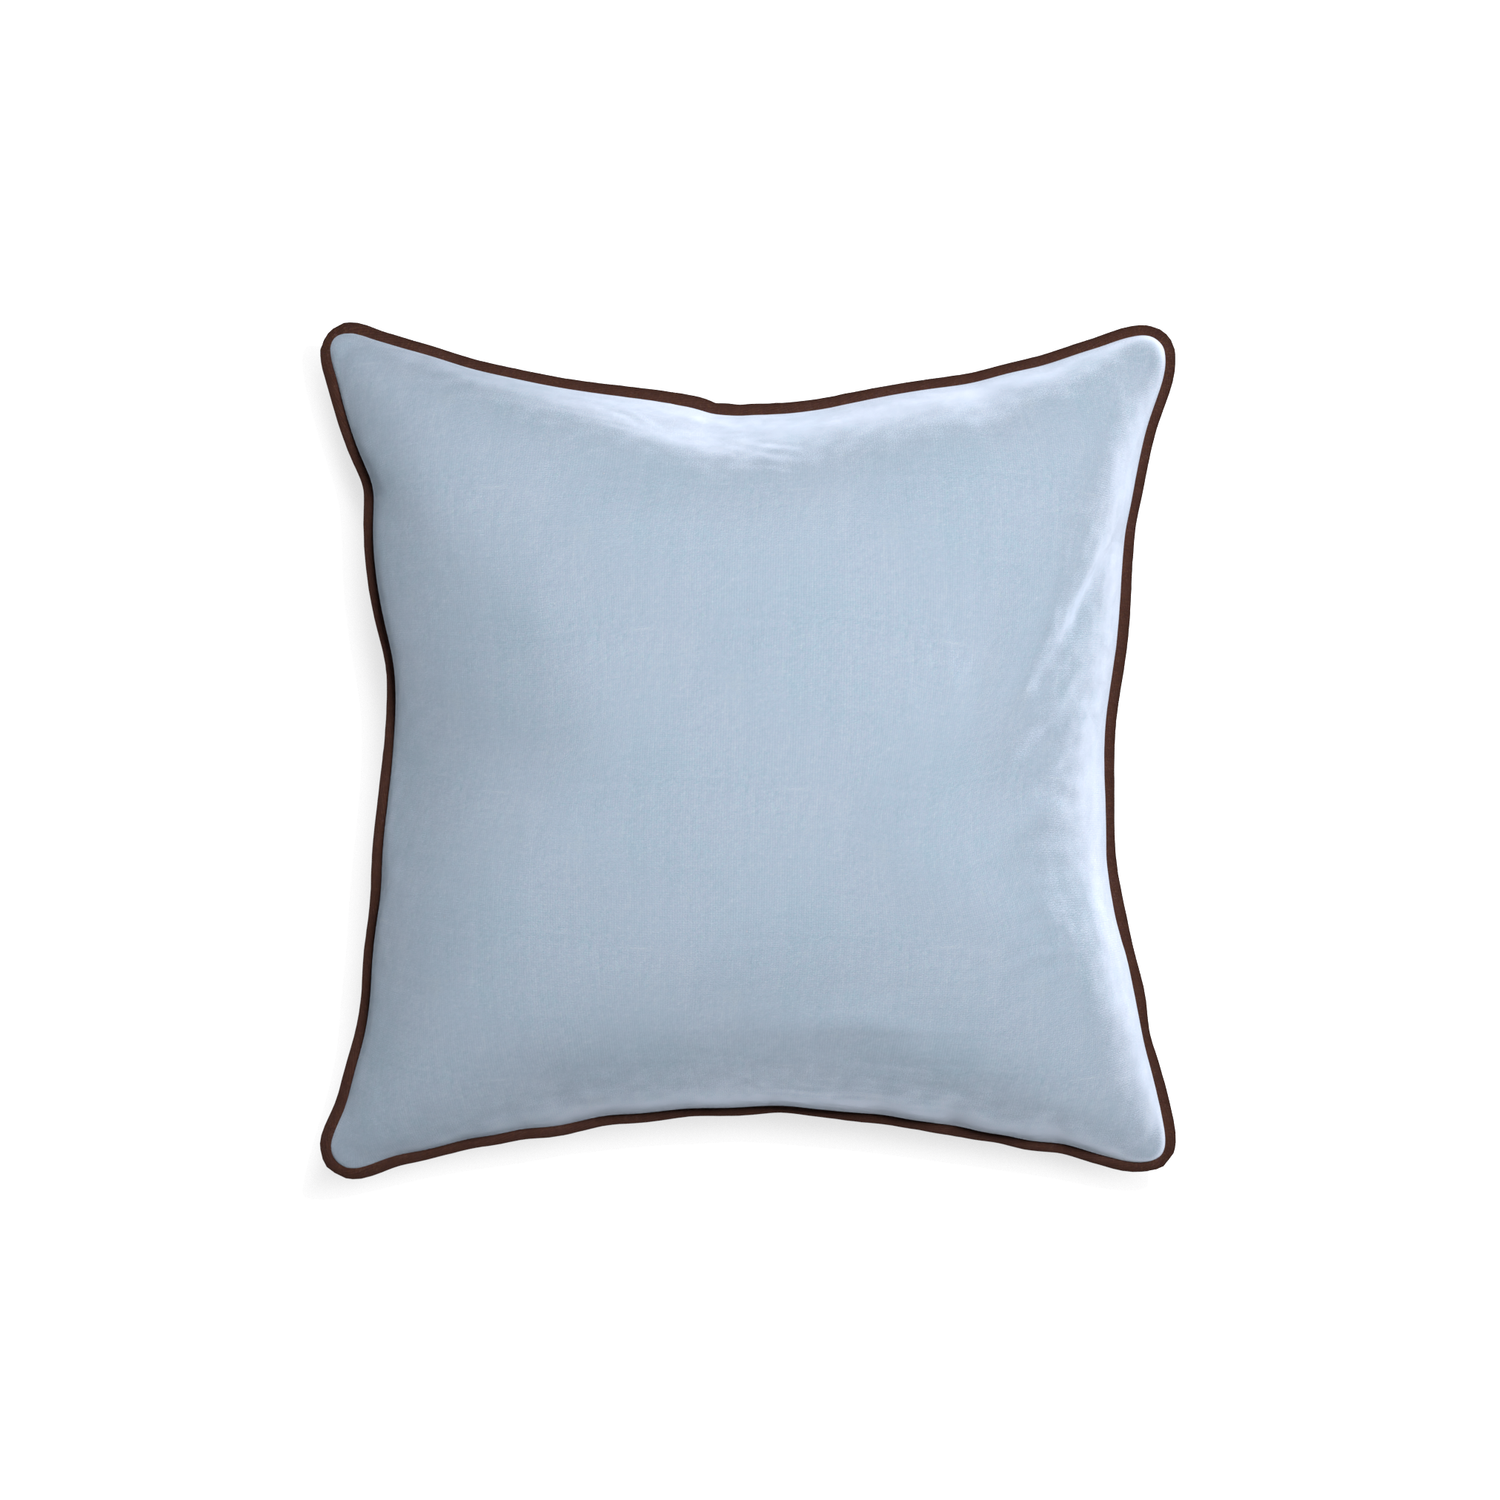 square light blue velvet pillow with brown piping